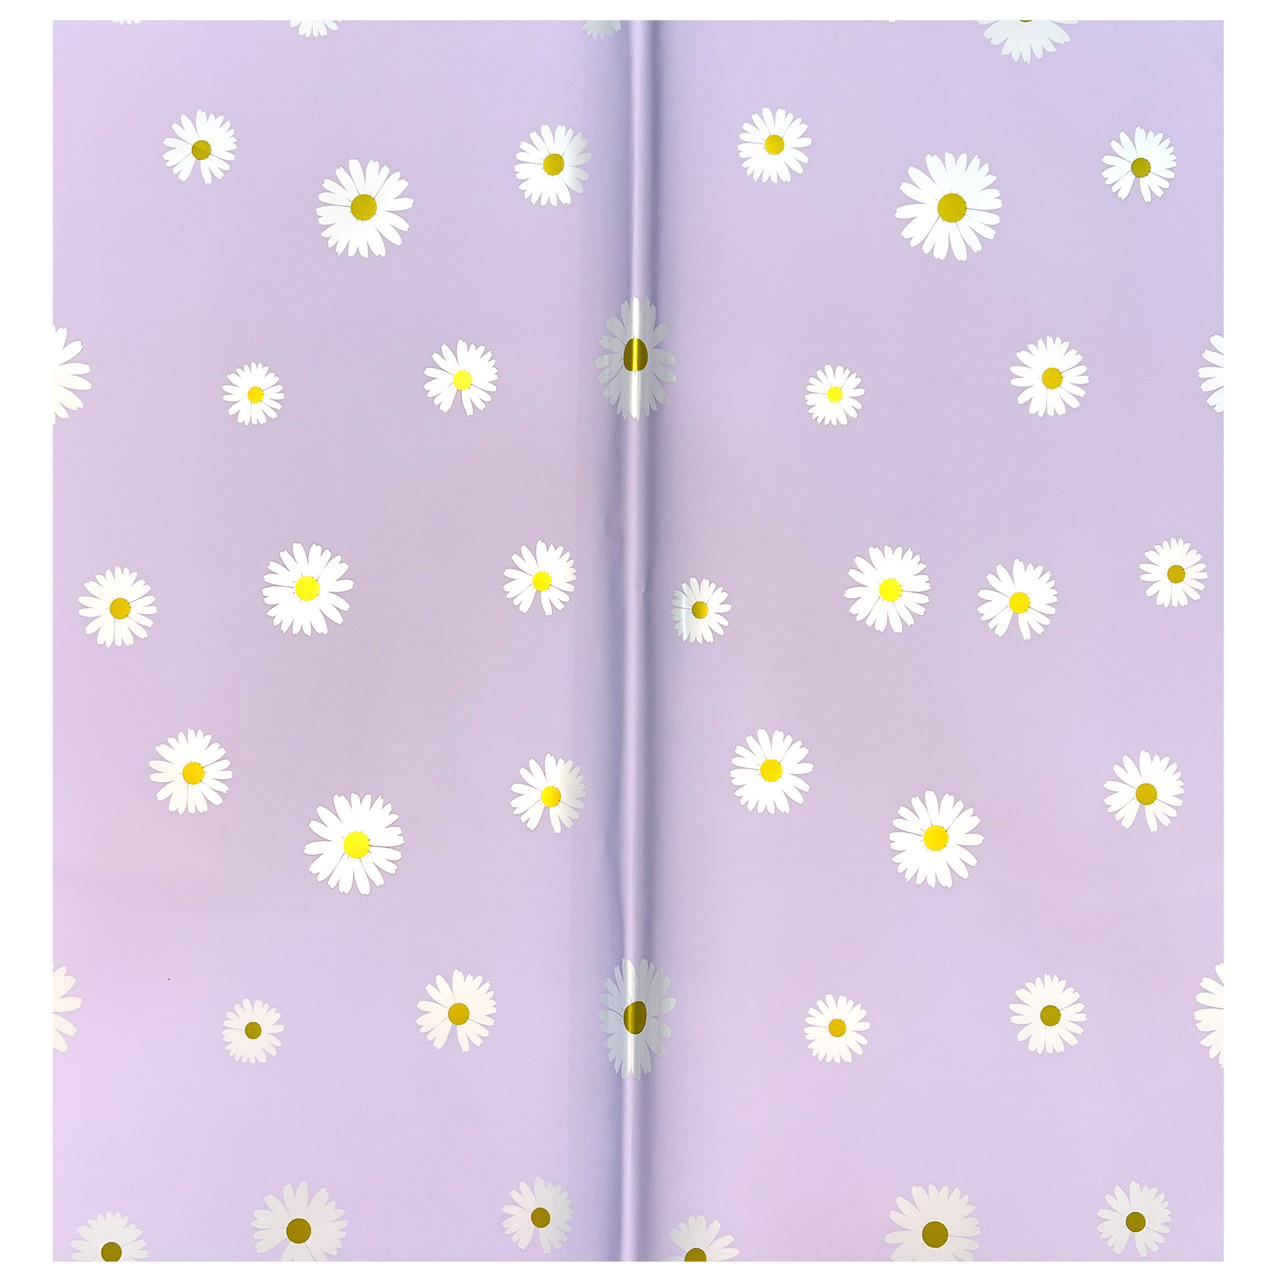 Daisy Print Peony Floral Wrapping Paper - 20 Sheets - LO Florist Supplies